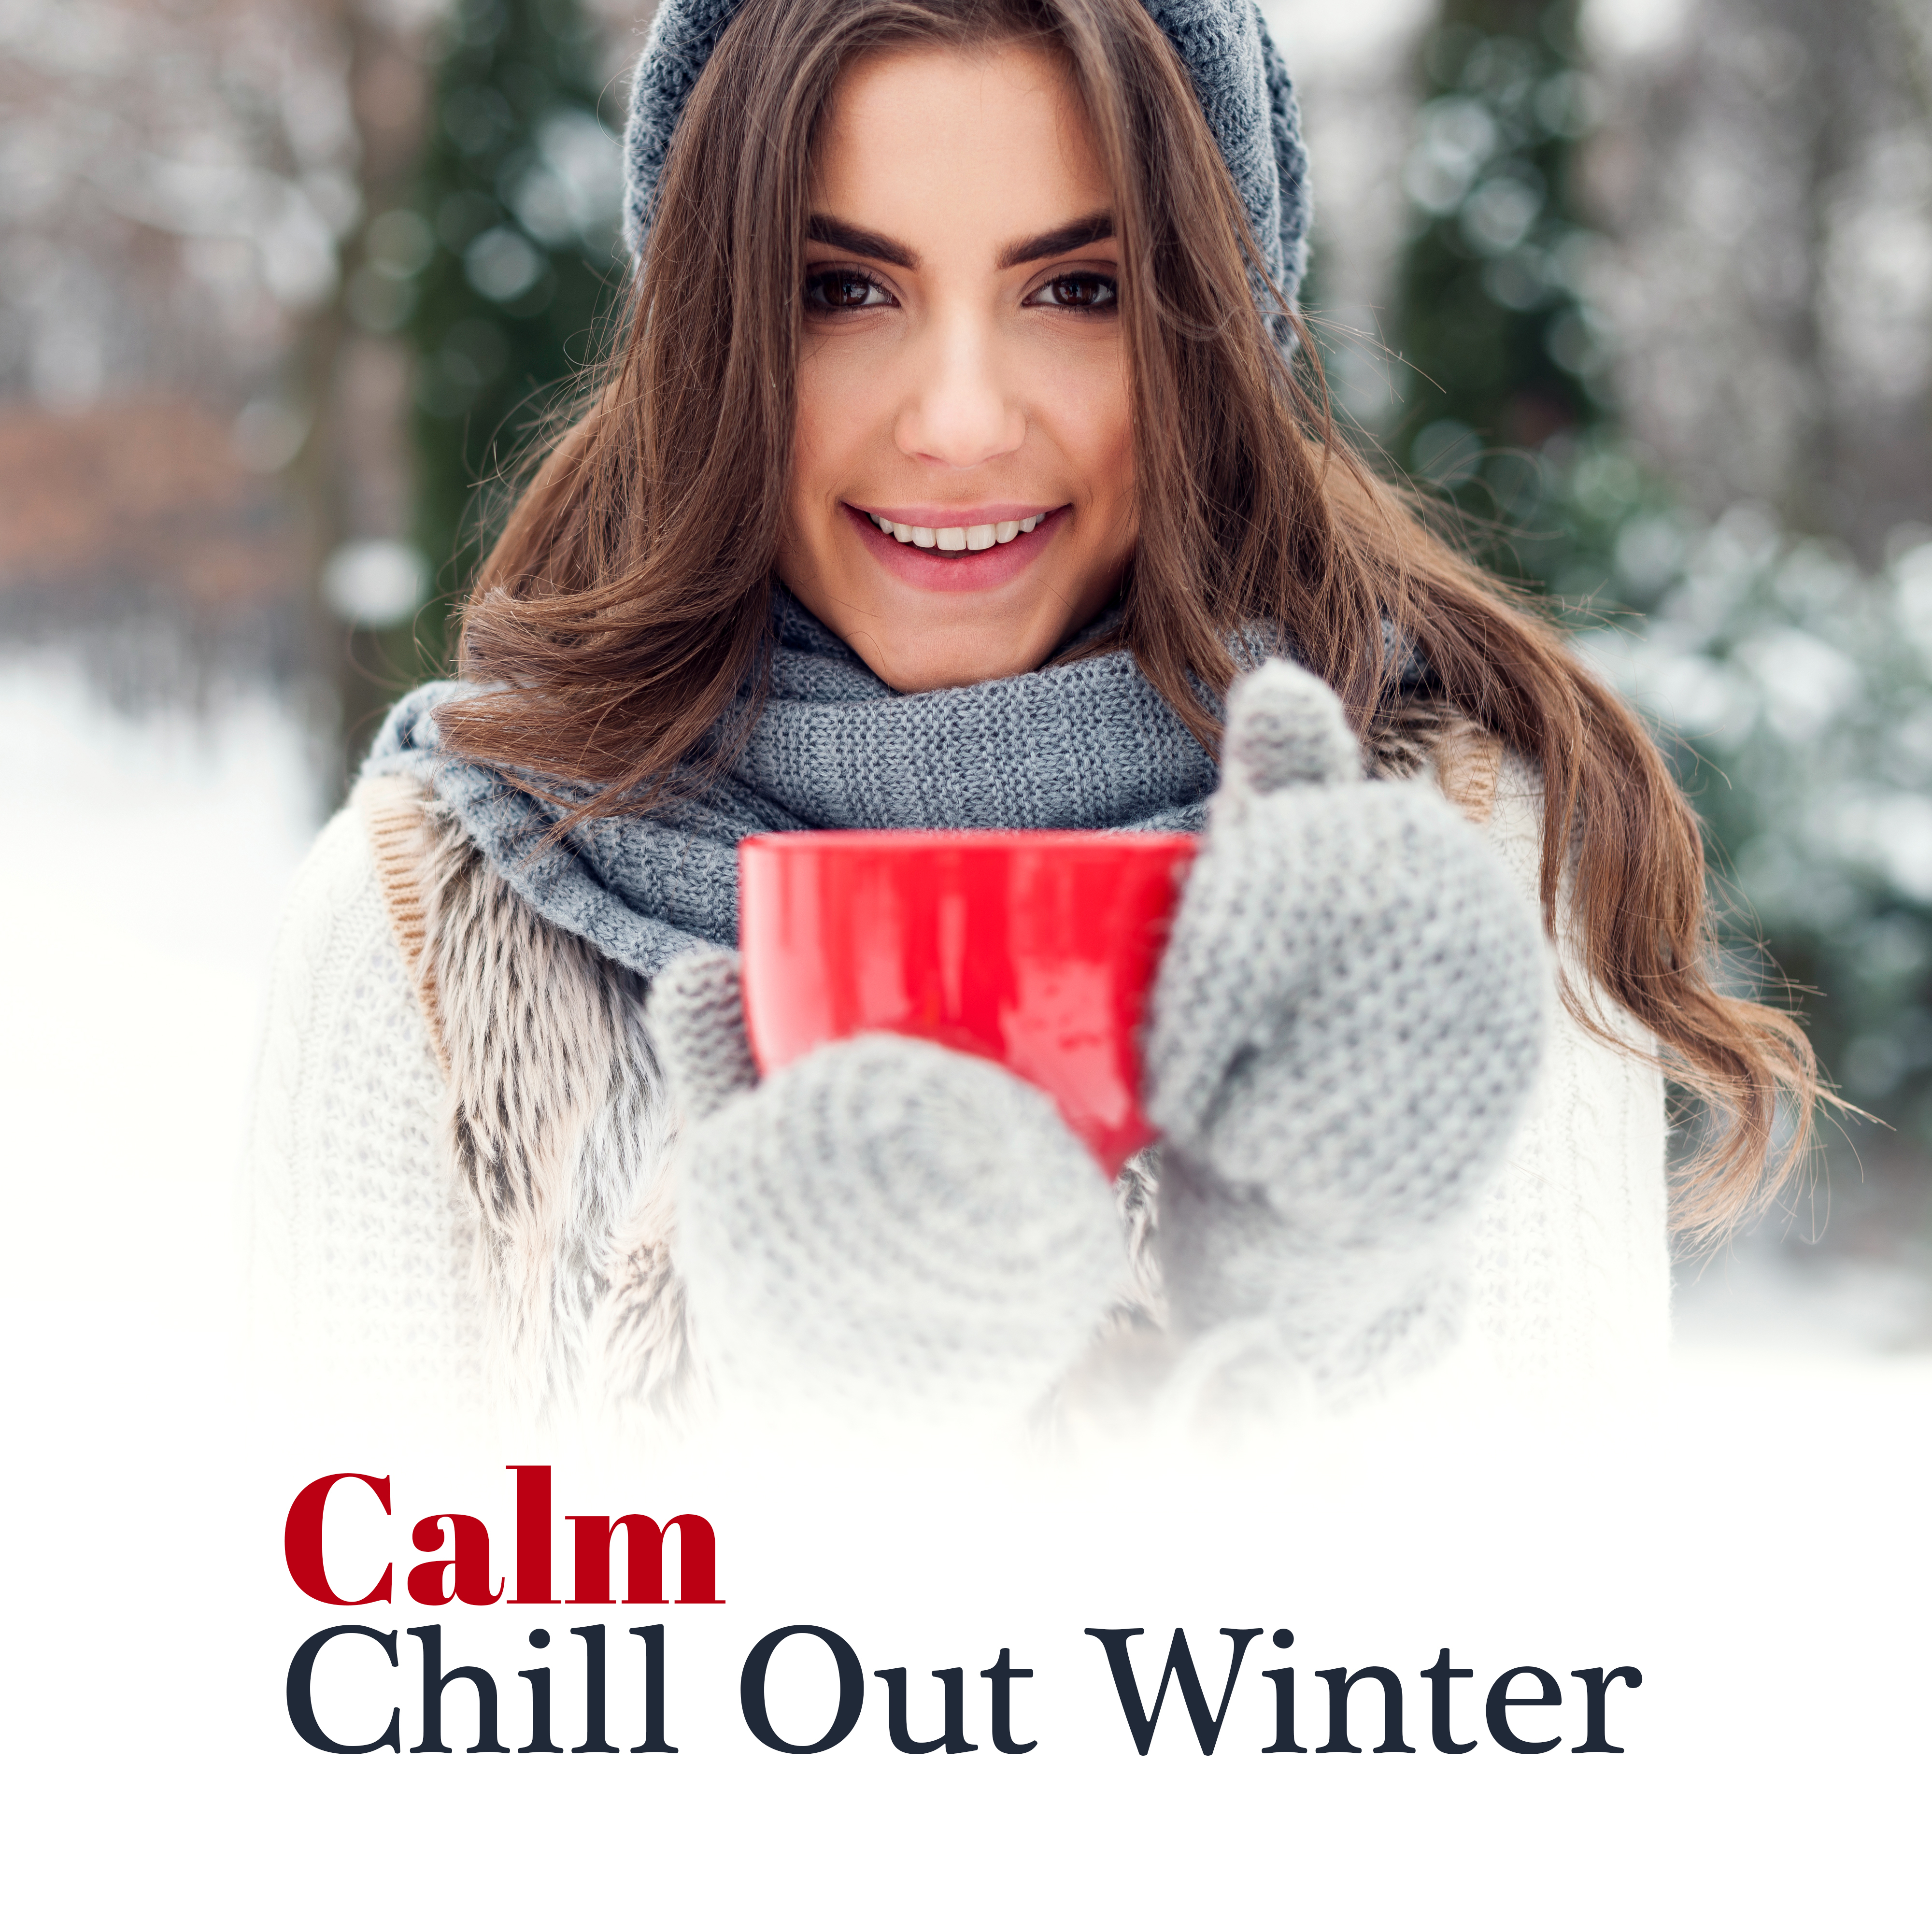 Calm Chill Out Winter